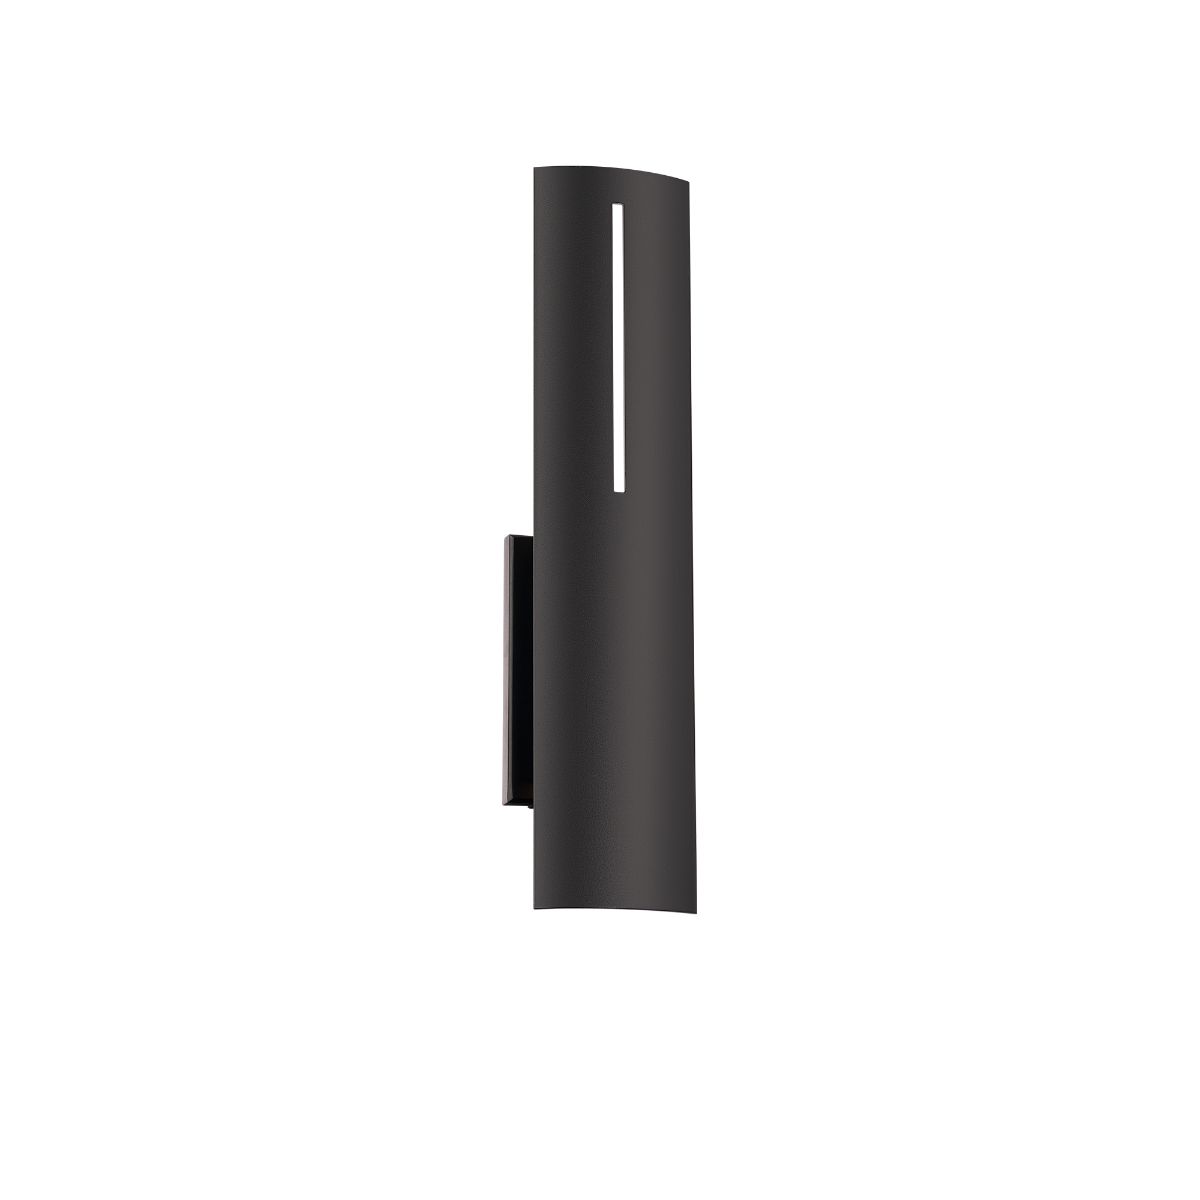 Aegis 20 In. LED Outdoor Wall Sconce 3500K Black Finish